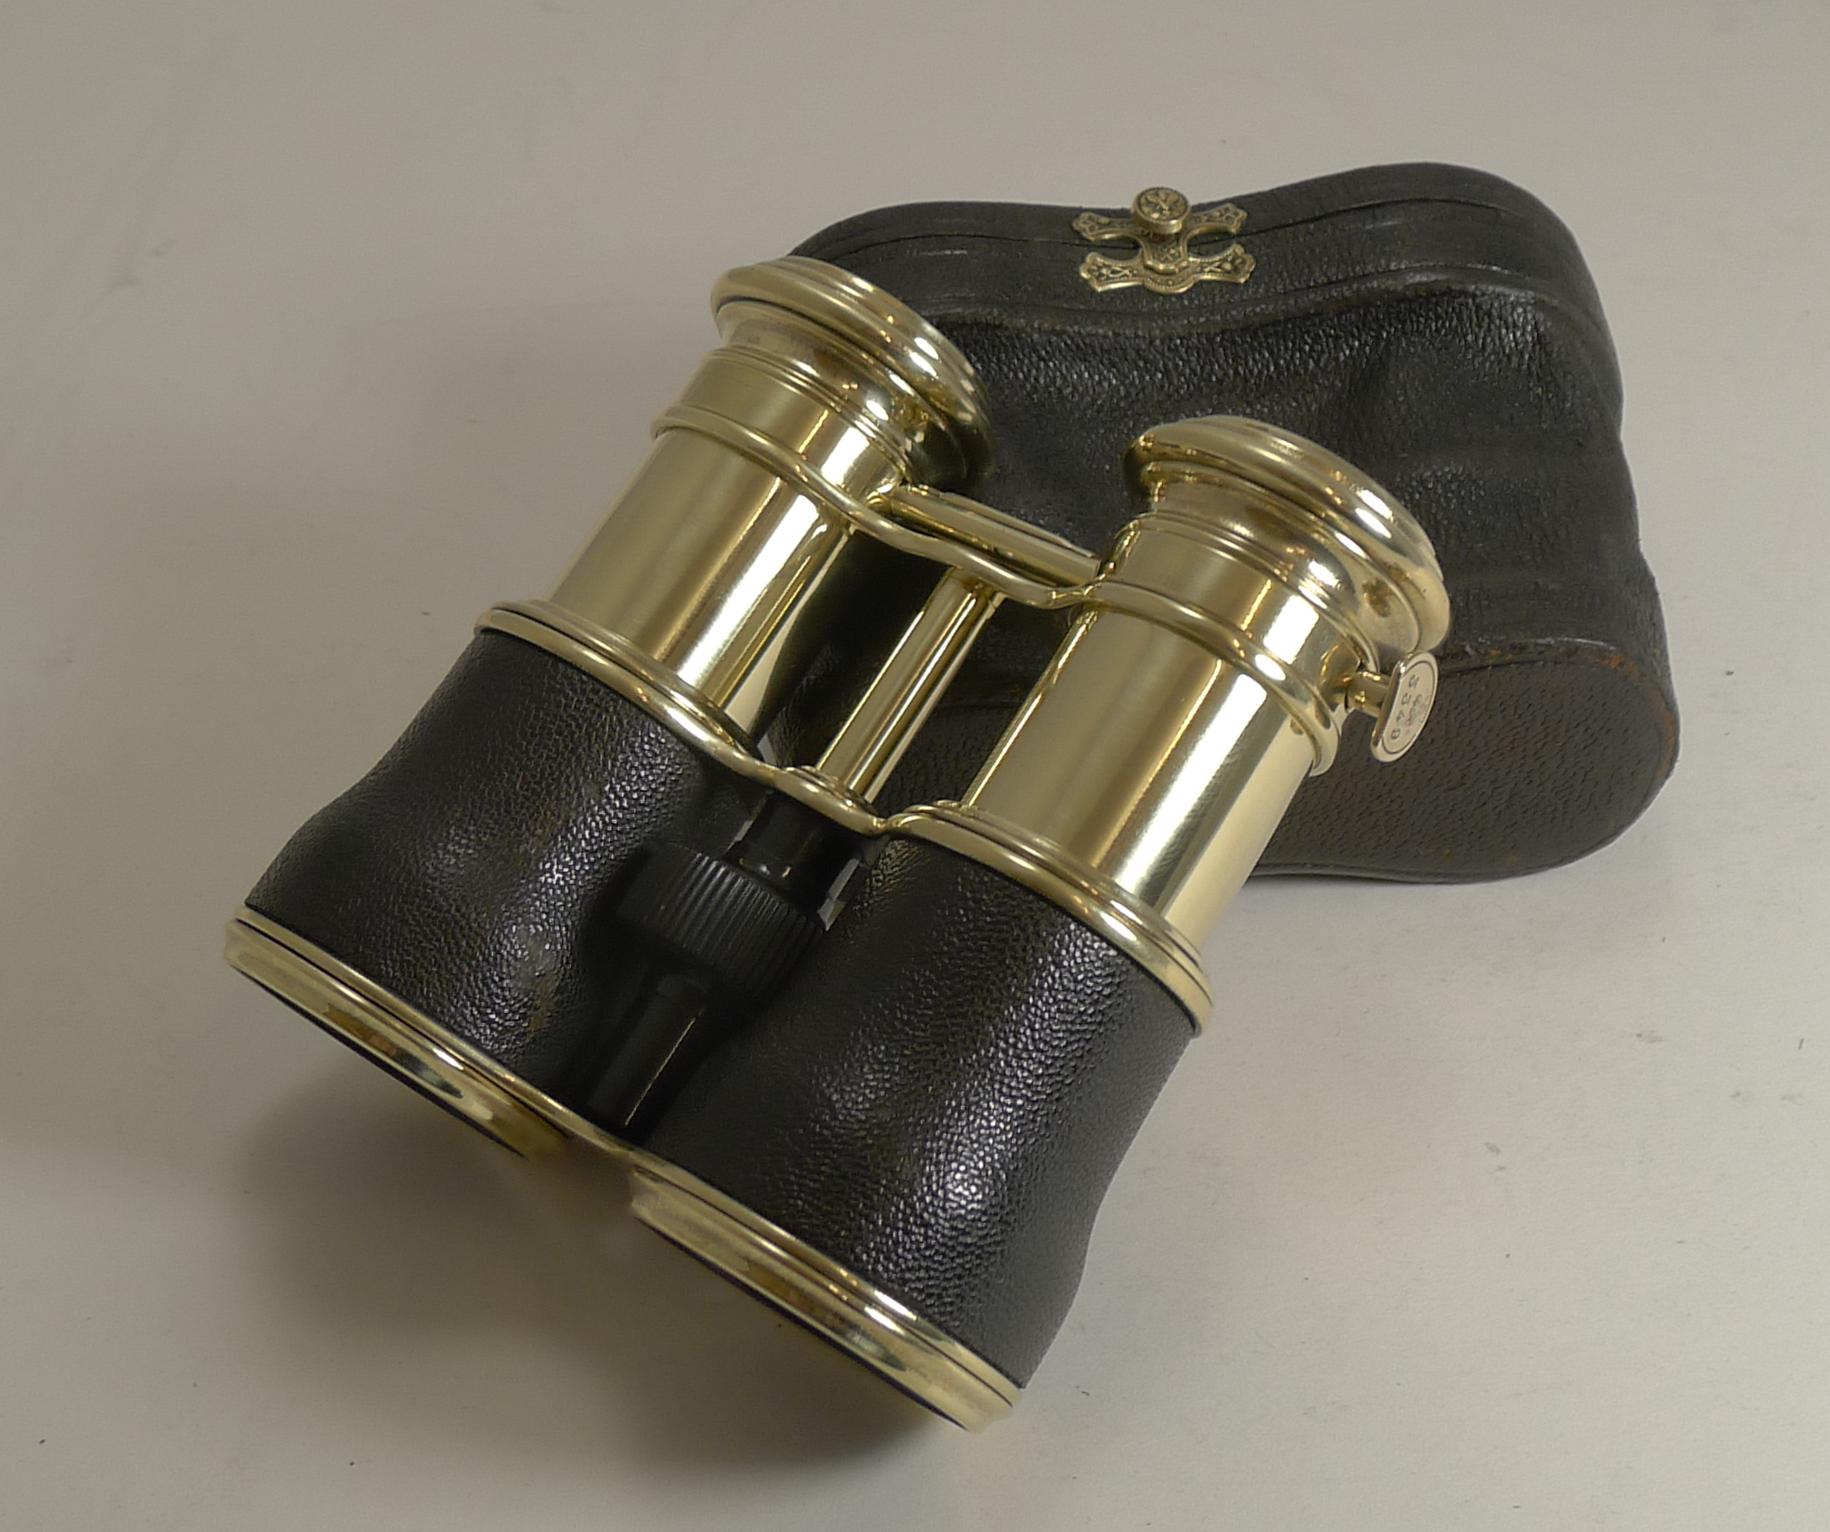 French Antique Triple Optic Binoculars, Marine / Theatre / Field circa 1900 by LeMaire